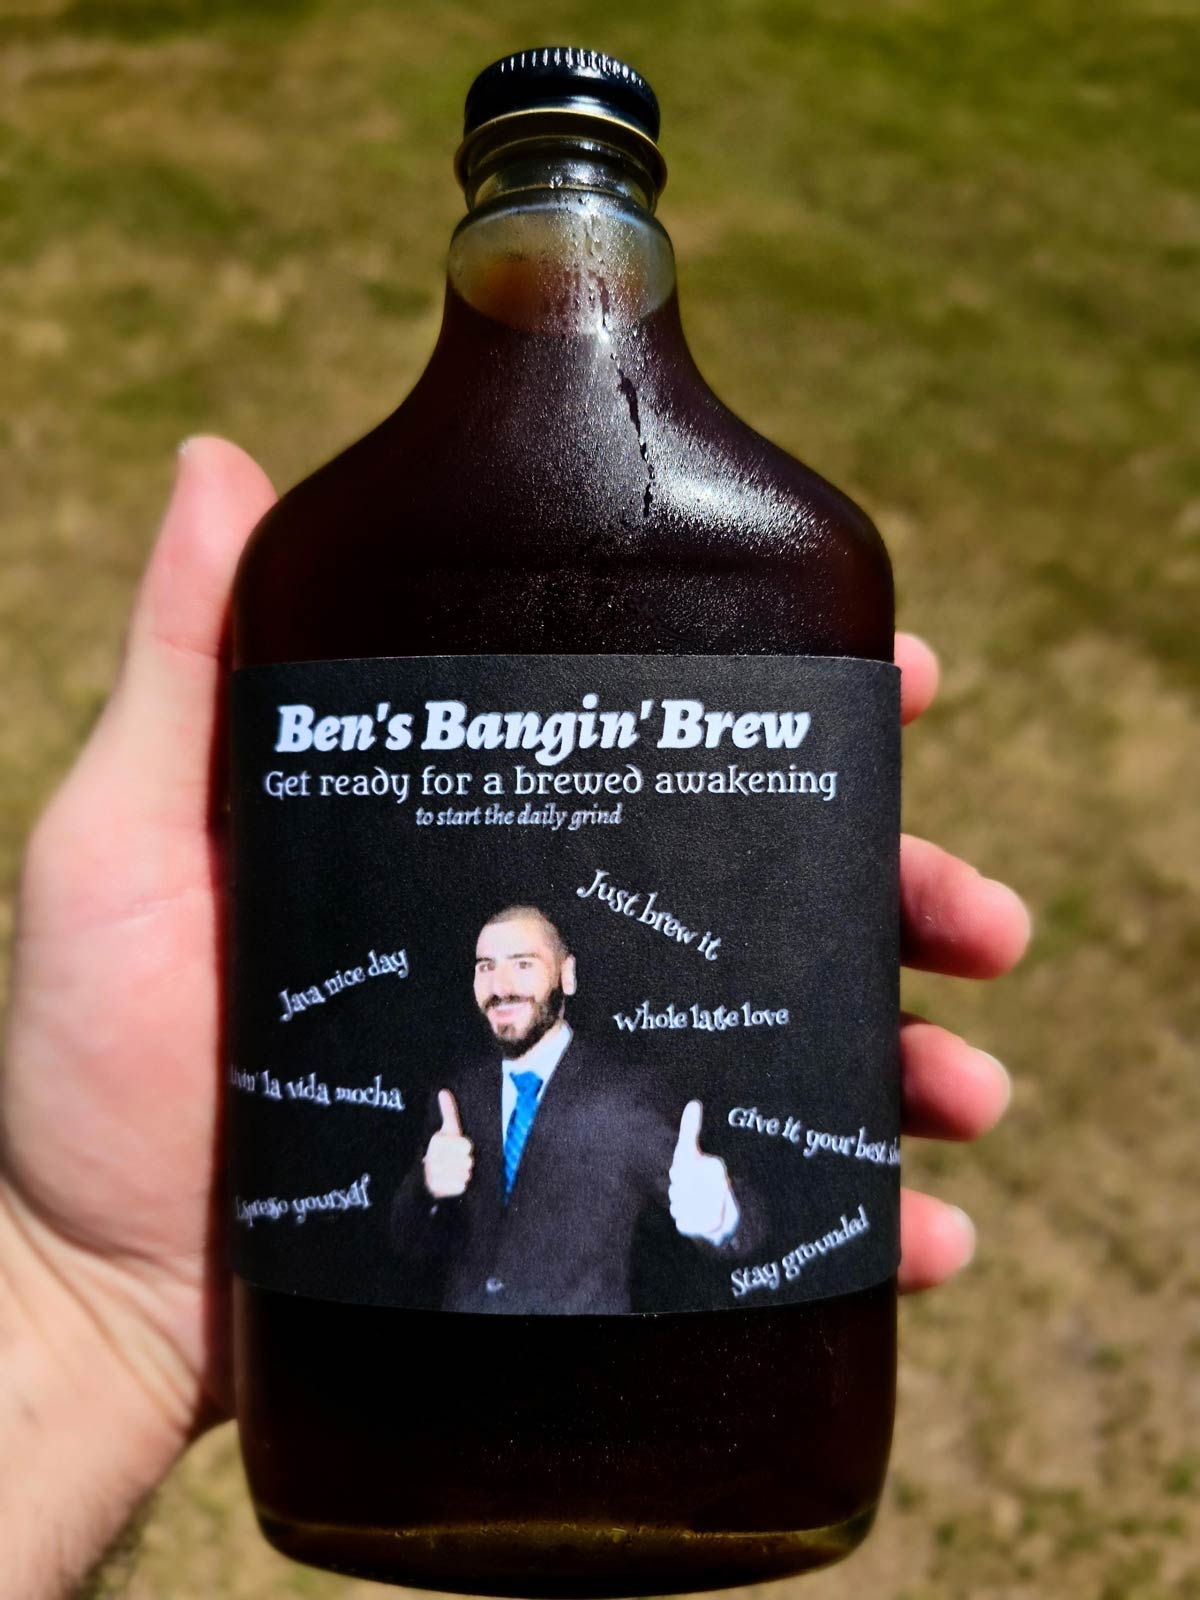 Should I quit my job to pursue my dream of getting into the cold brew coffee business?